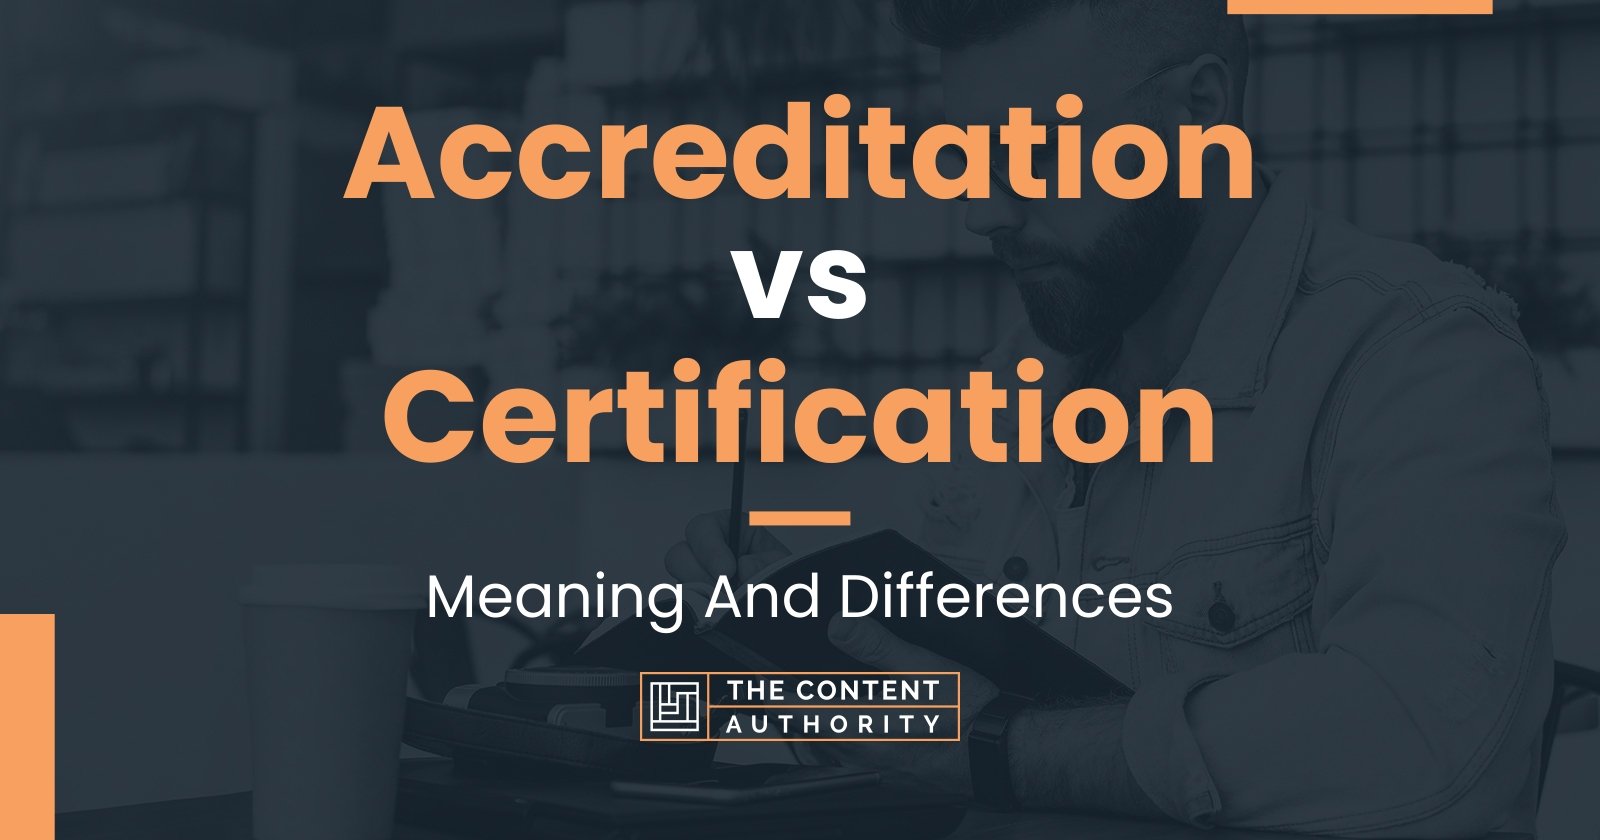 Accreditation vs Certification: Meaning And Differences